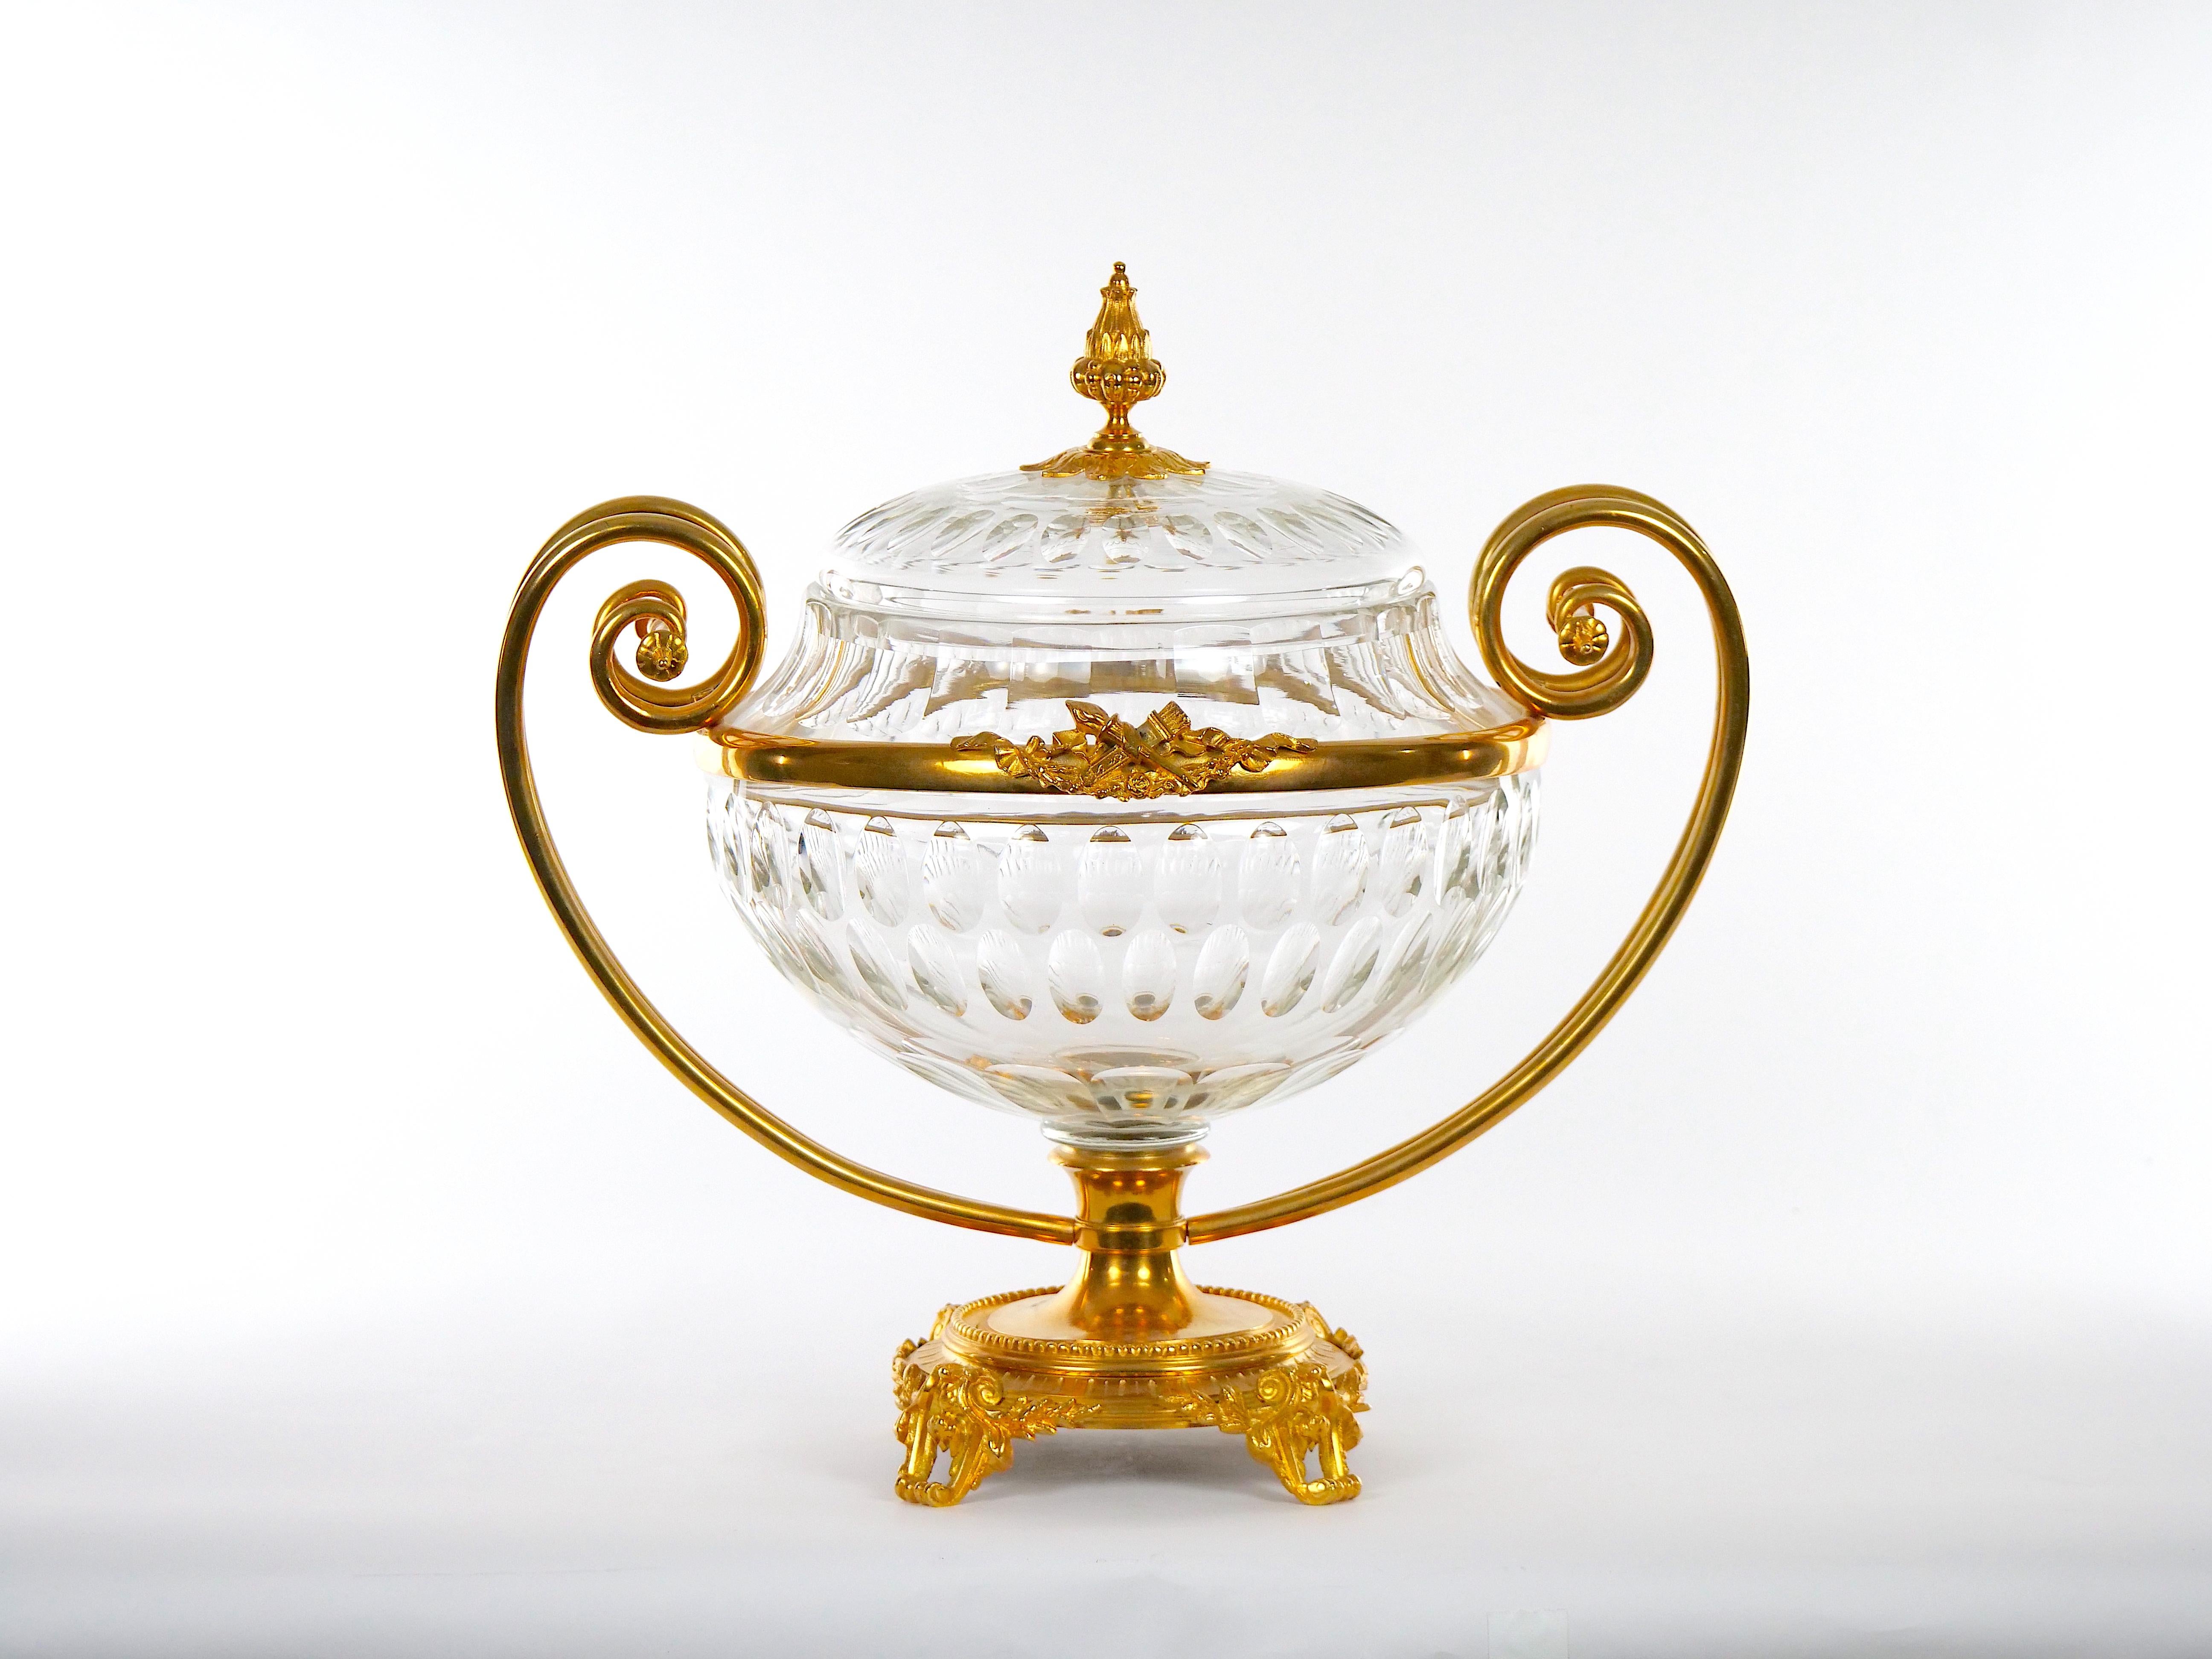 Wonderful French Empire gilt ormolu bronze mounted hand-cut crystal covered decorative Bowl. The centerpiece features a bright gilt bronze holding frame with double side handles with finial holding top resting on a footed round base. The diamond cut